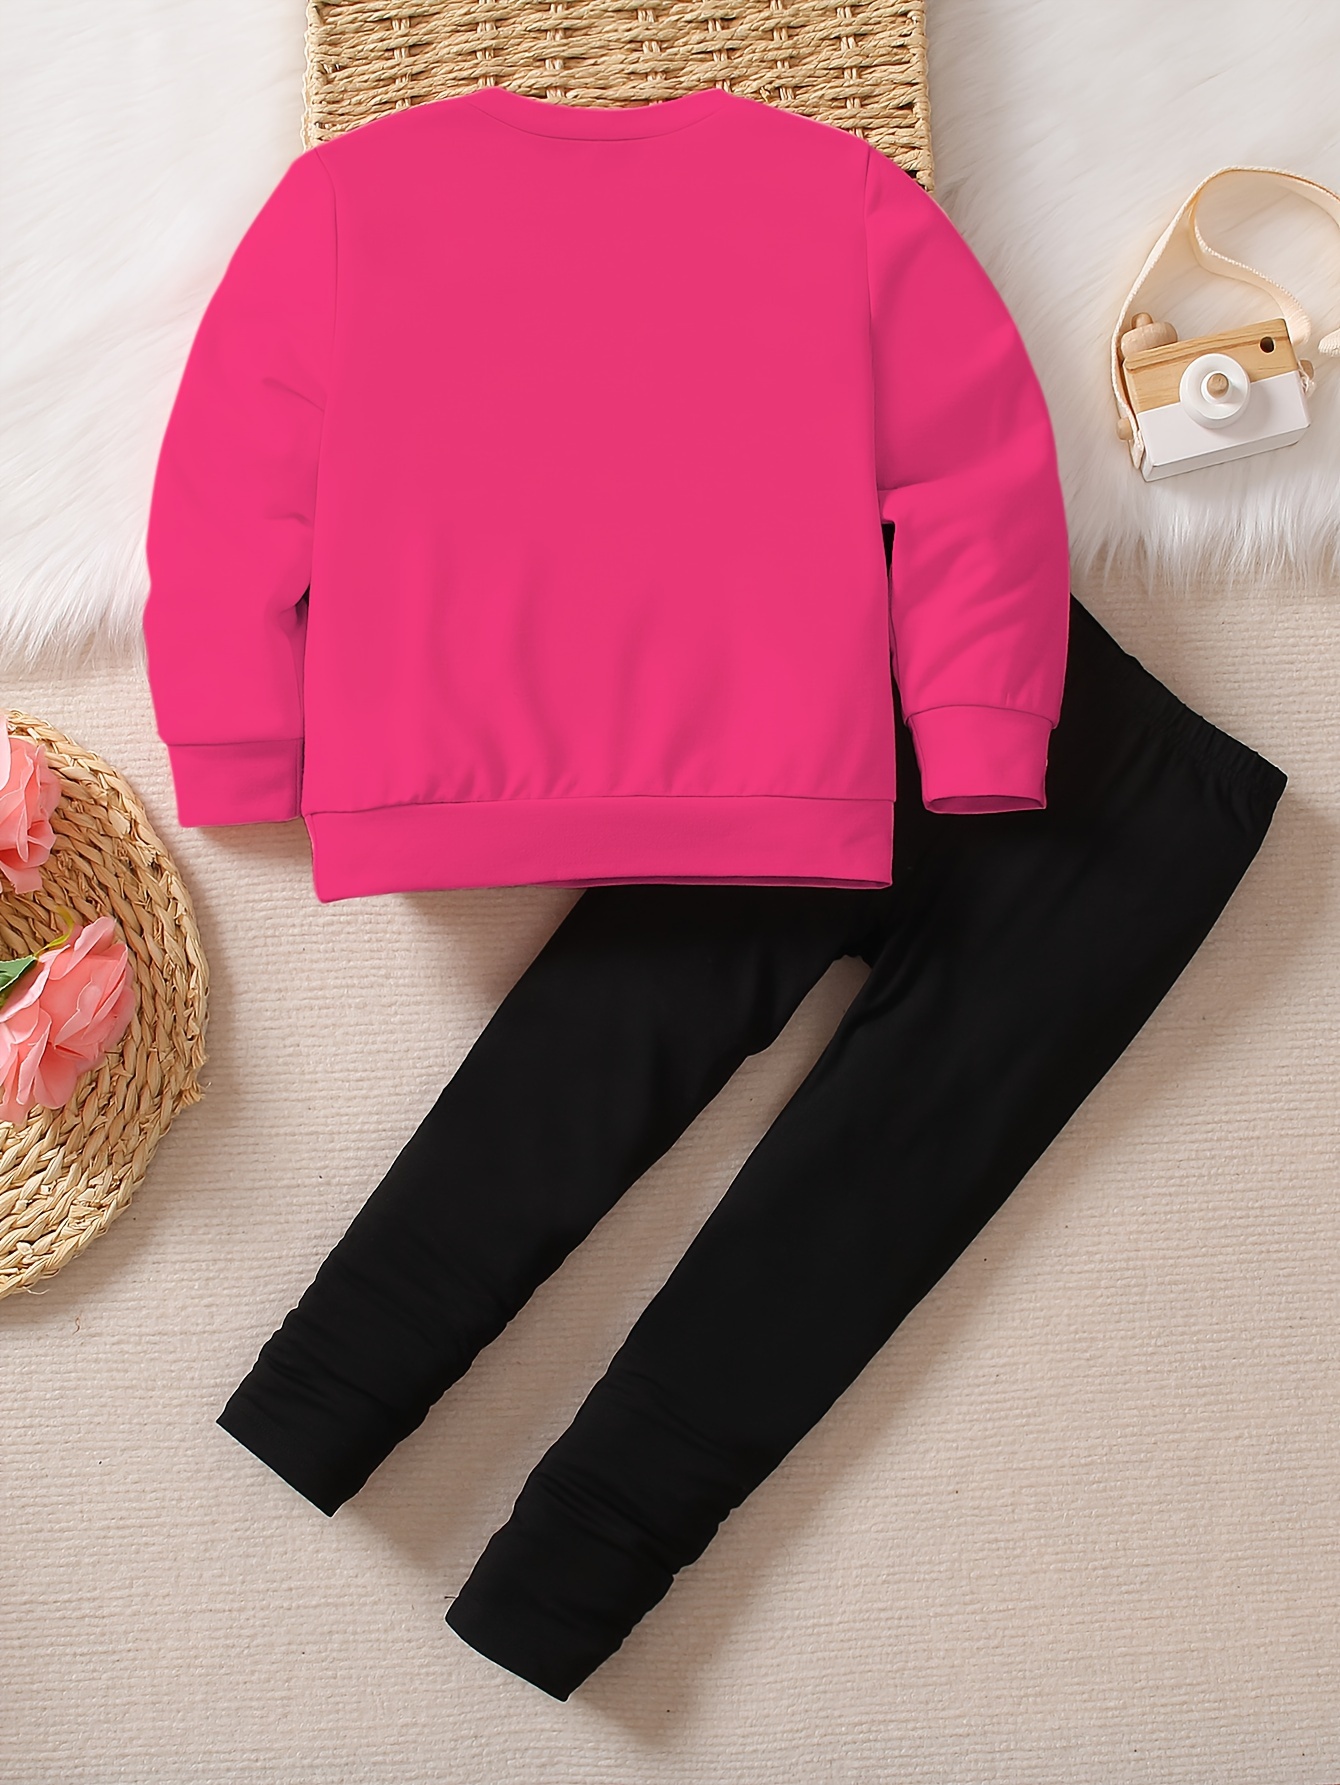  zarmfly Girl Cat Outfit 2 Piece Long Sleeve Kitten Sweatshirt  Top Jogger Pants Set Kids Leggings Sweatsuit Toddler Cute Winter Clothes  6t: Clothing, Shoes & Jewelry